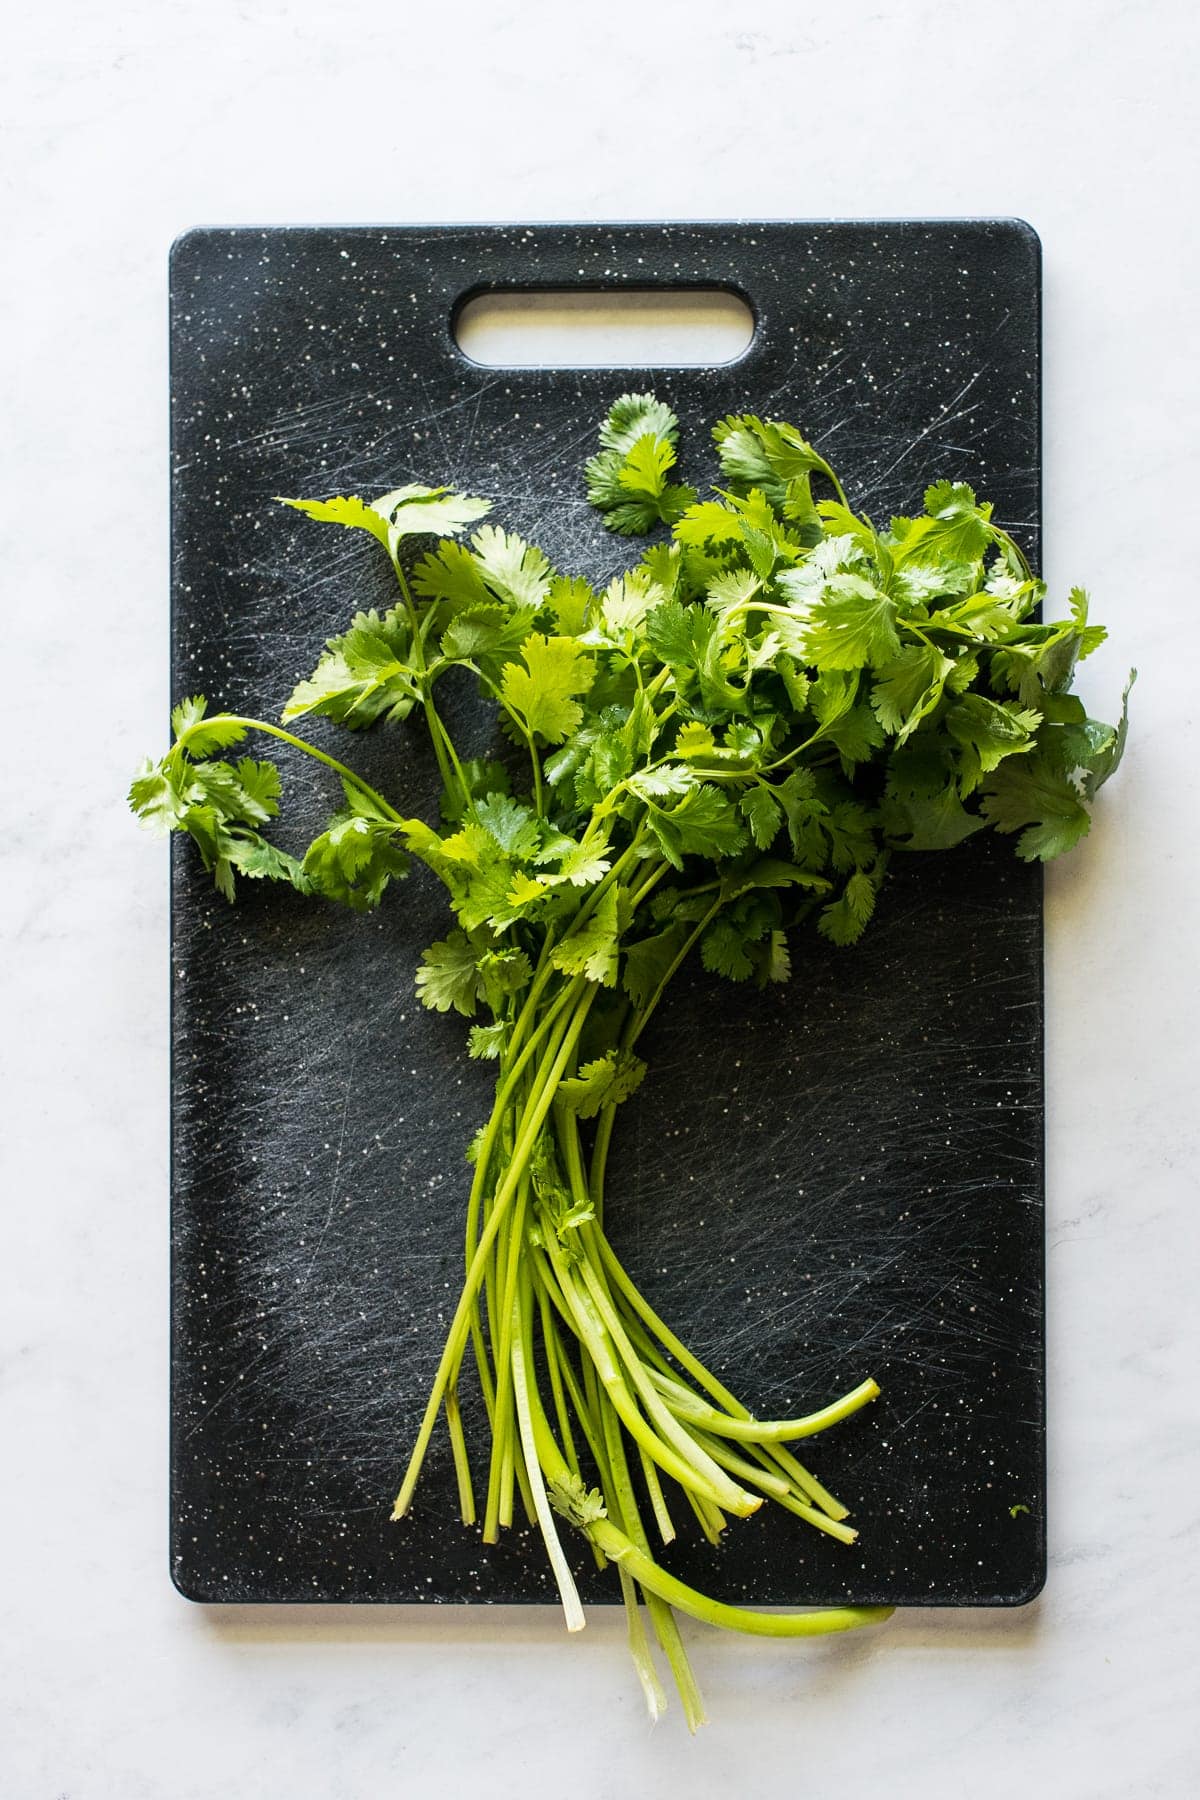 https://www.isabeleats.com/wp-content/uploads/2020/05/how-to-chop-cilantro-small-1.jpg